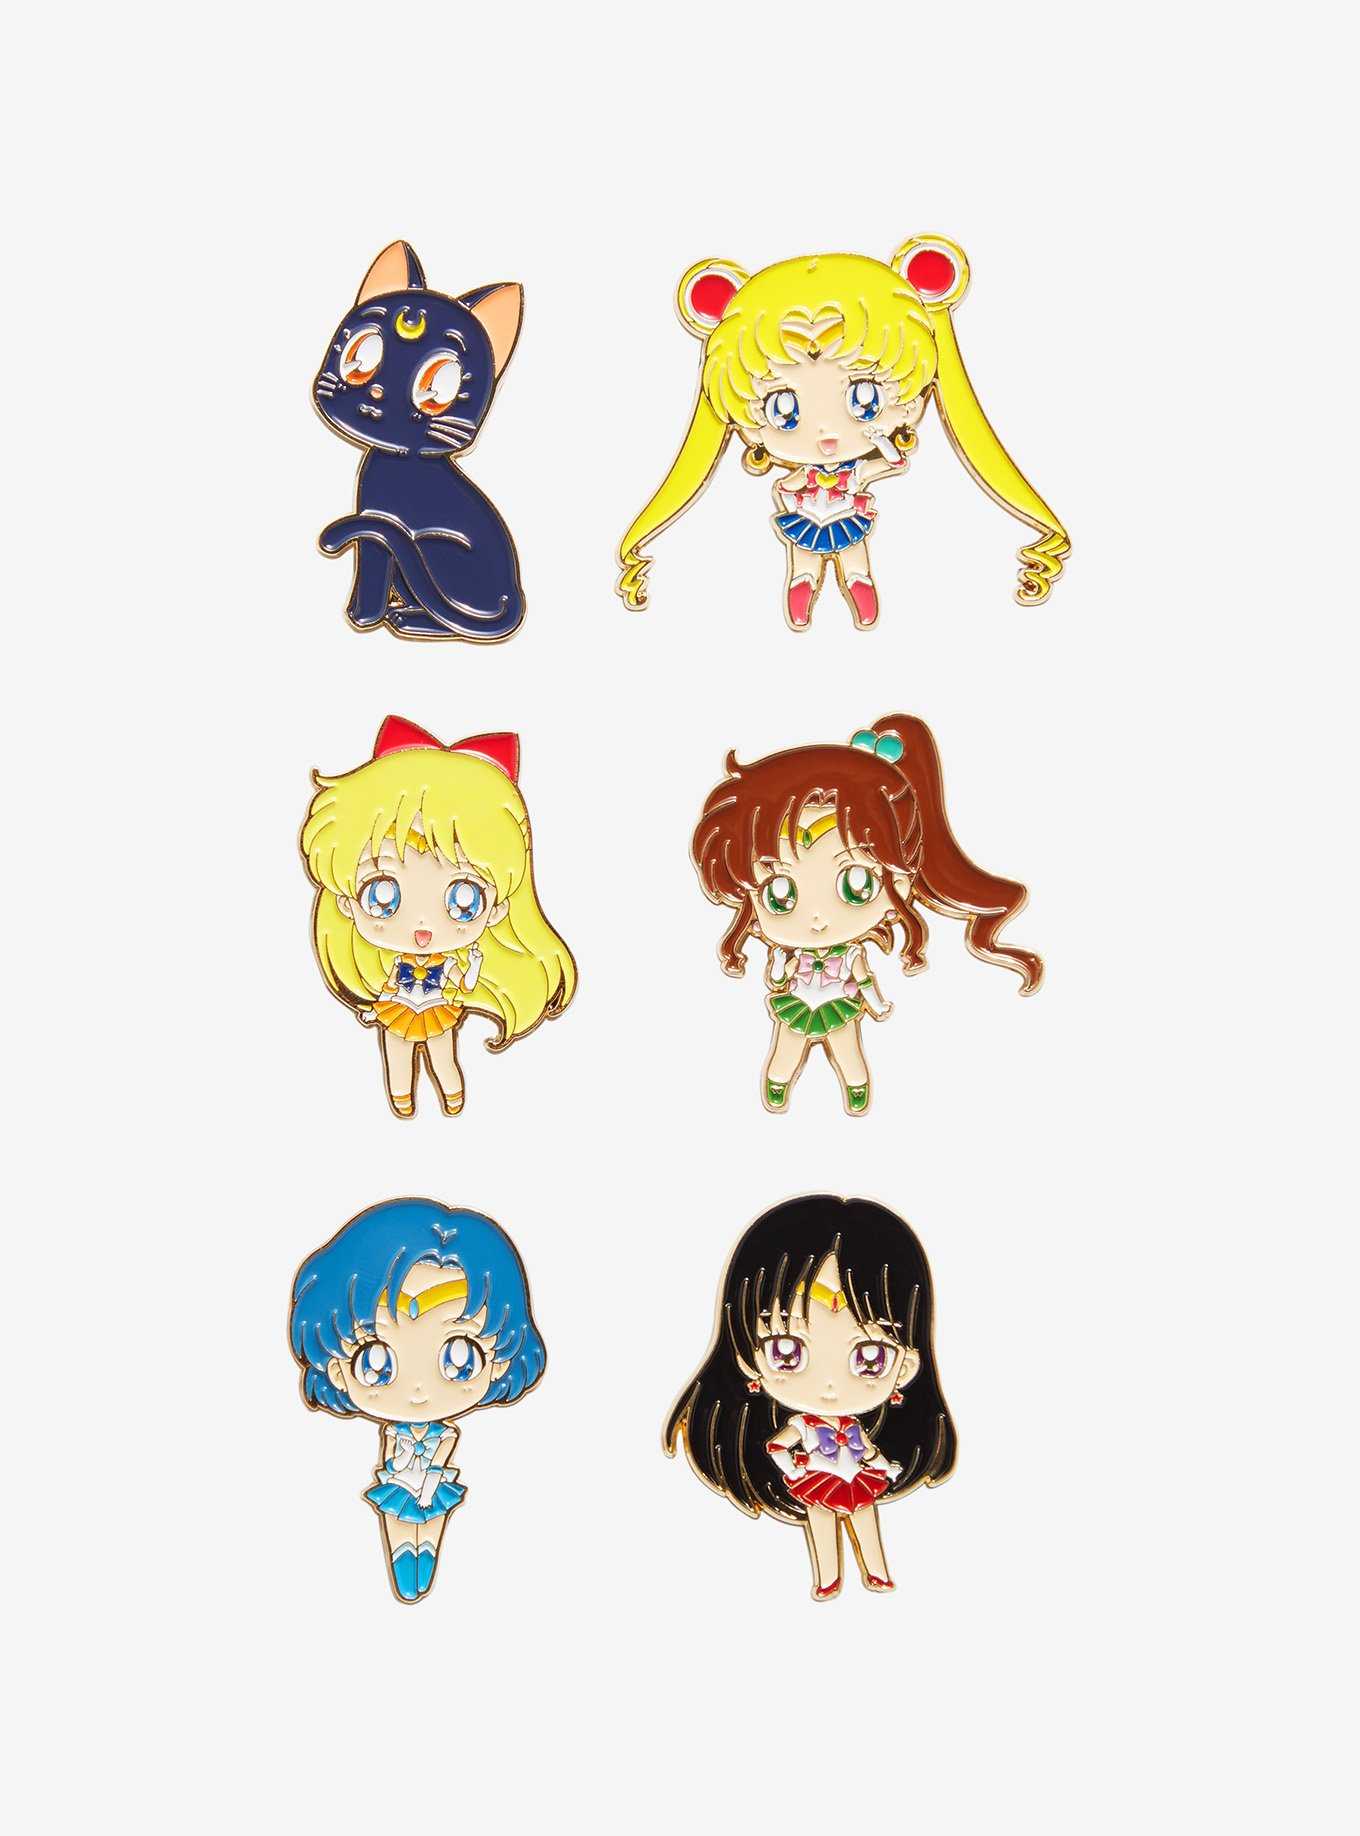 Pin by Serenity Cosmos on Pretty Guardian: Sailor Moon Cosmos🌙 in